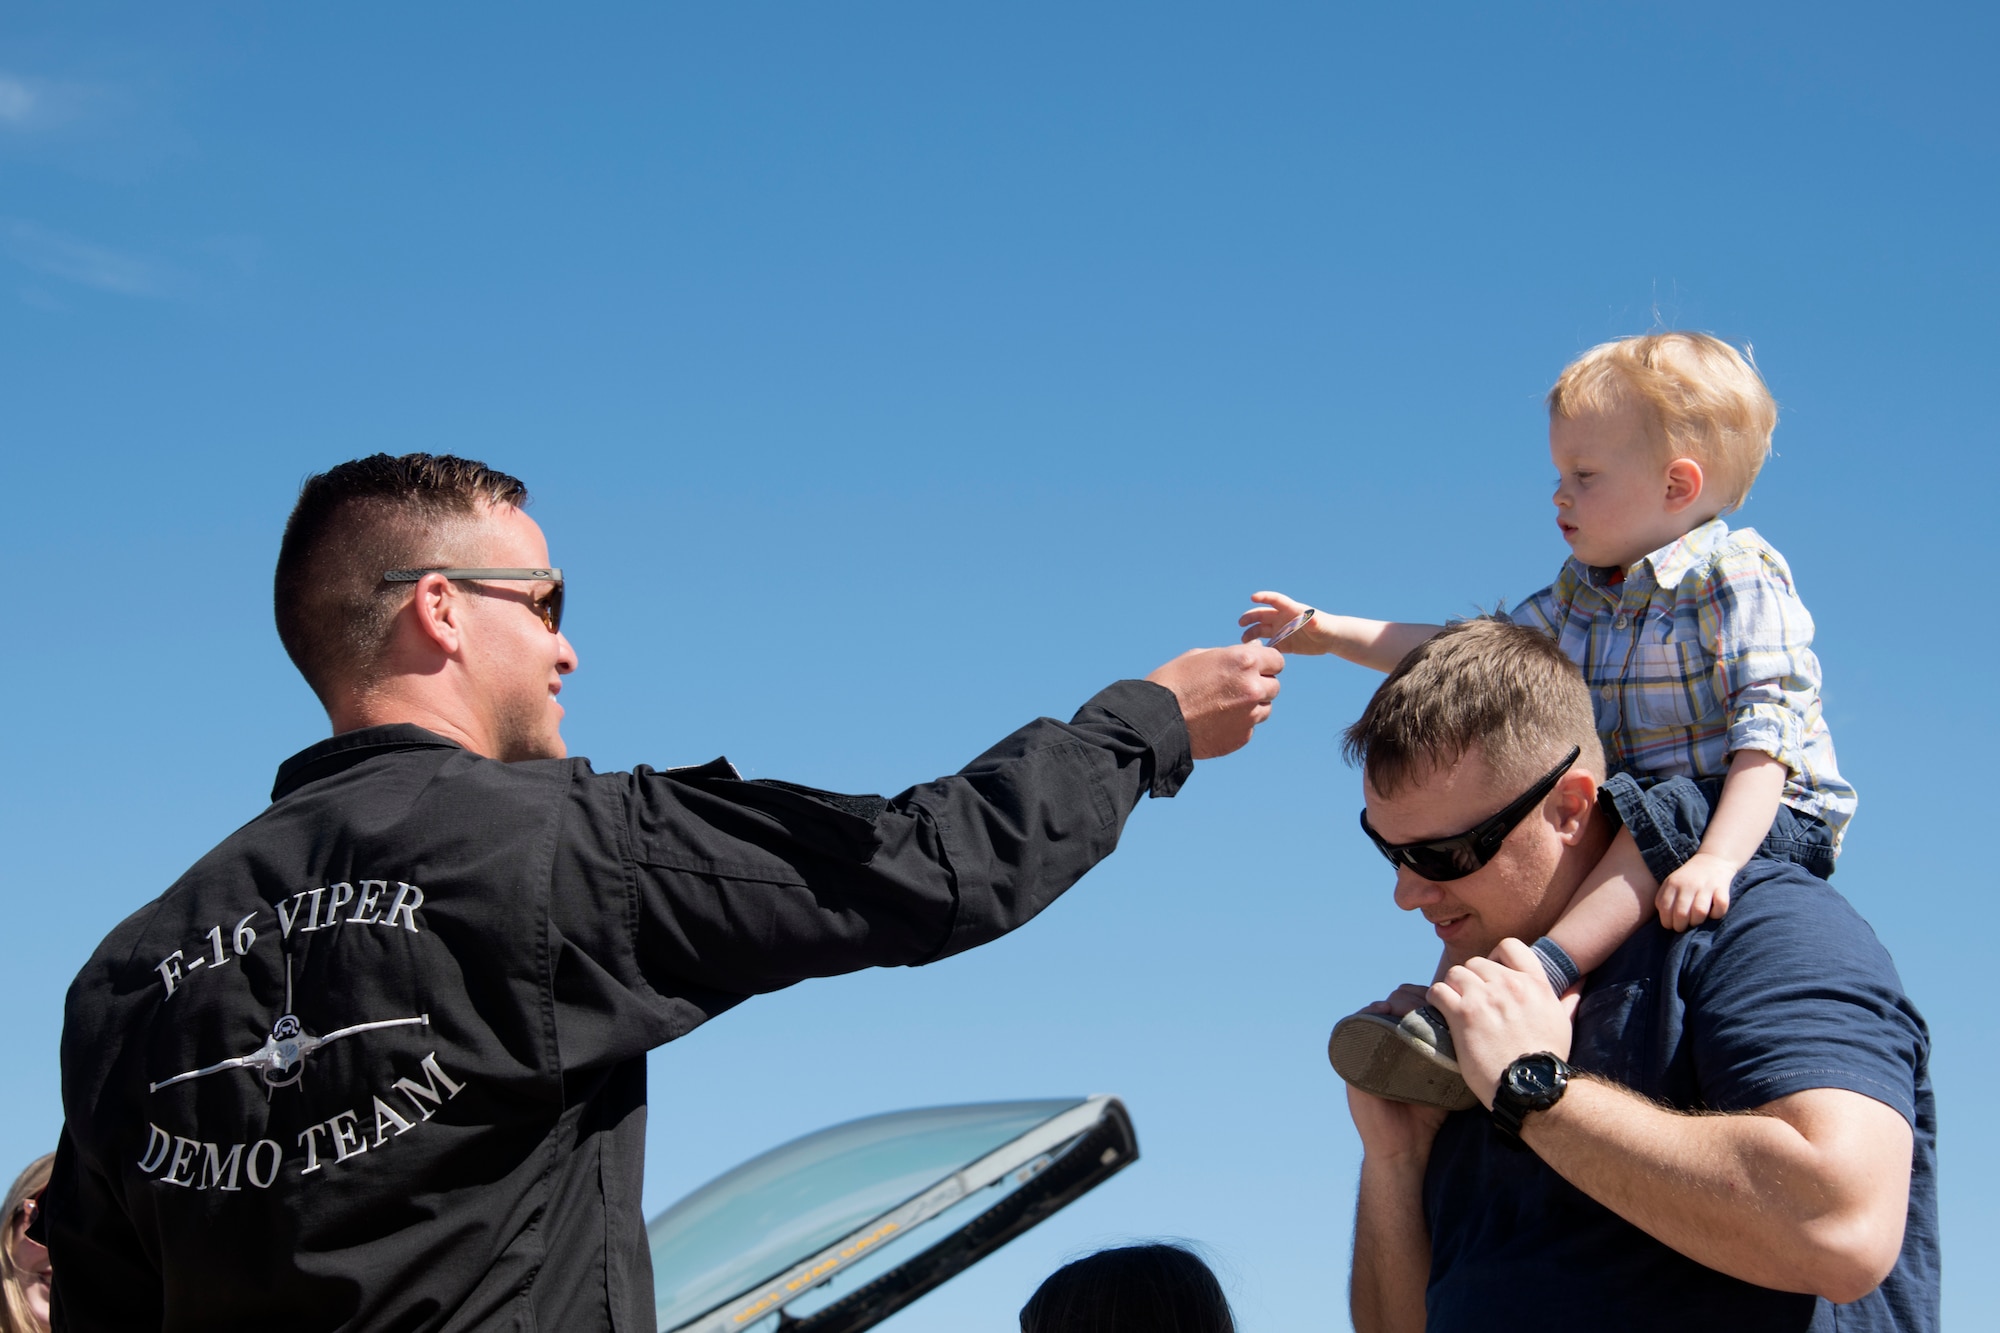 U.S. Air Force Staff Sgt. Trevor Griswold, F-16 Viper Demonstration Team electrical and environmental systems craftsman, hand a sticker to a child on the flight line at Davis-Monthan Air Force Base, Ariz., March 3, 2019.